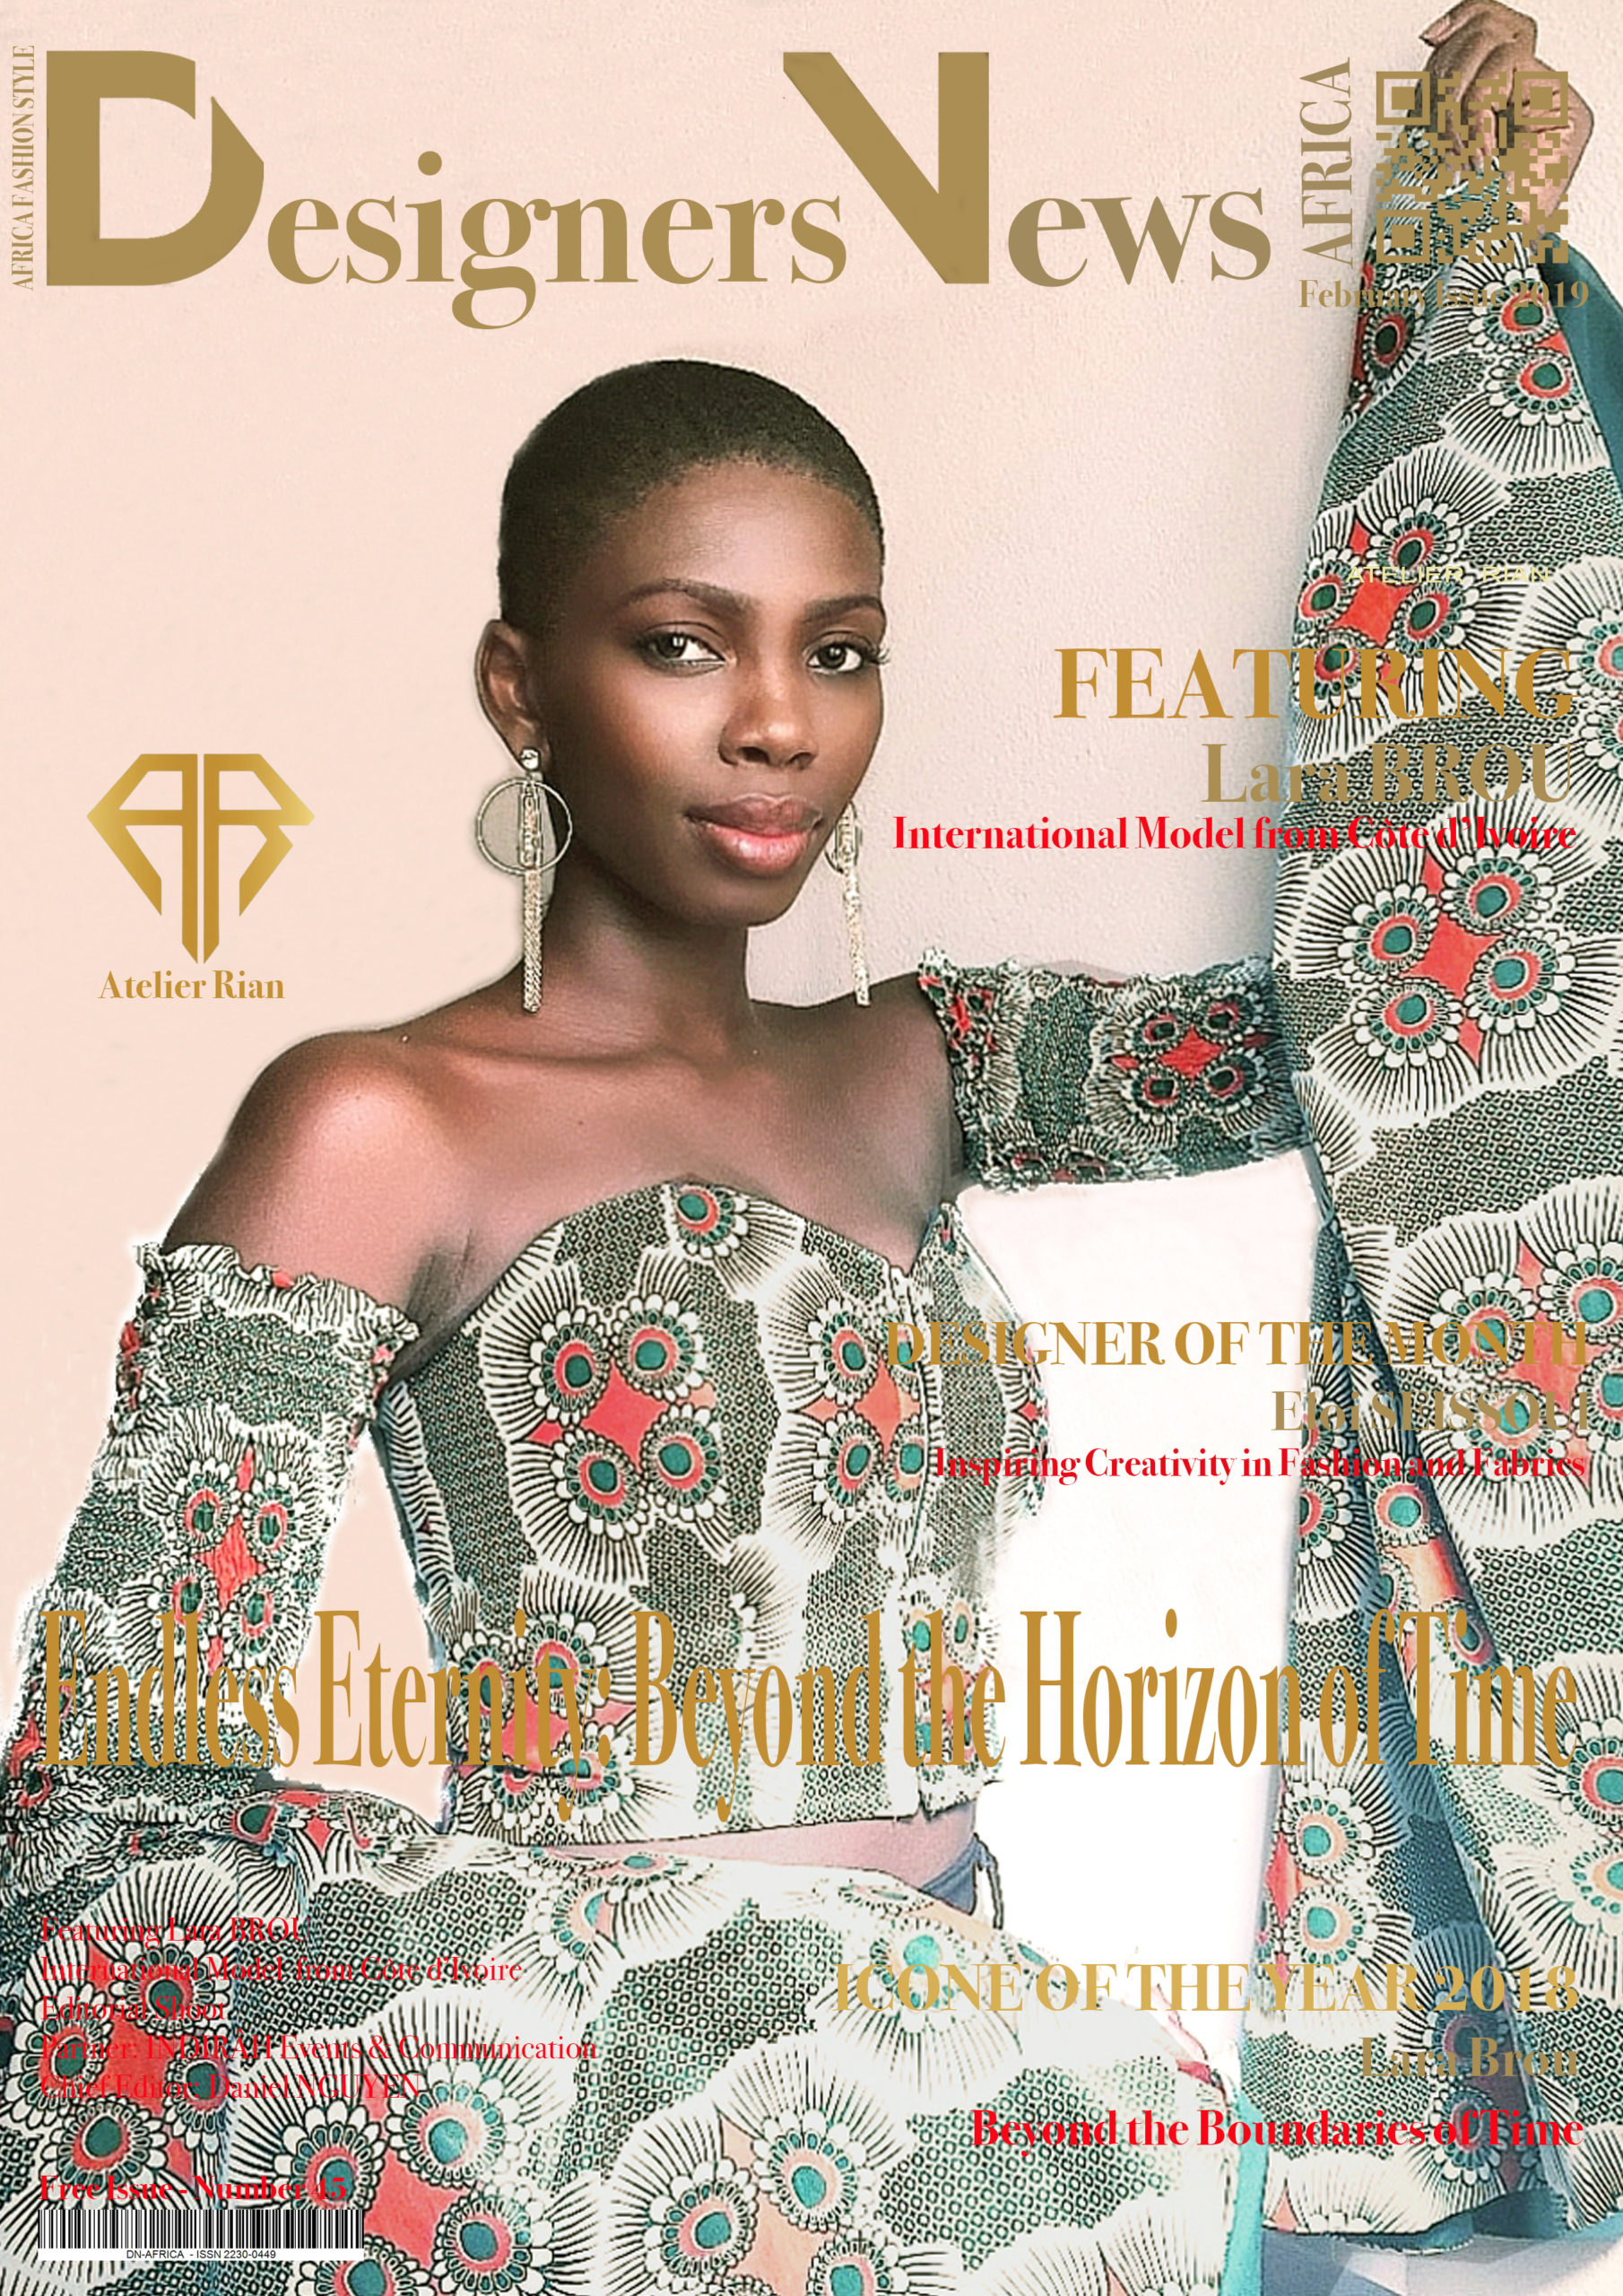 AFRICA-FASHION-STYLE-2490X3508-DN-AFRICA-COVER-NUMBER-45-FEBRUARY-11TH-2019-LARA-BROU-INTERNATIONAL-MODEL-FROM-COTE-D'IVOIRE-DN-AFRICA-Media-Partner